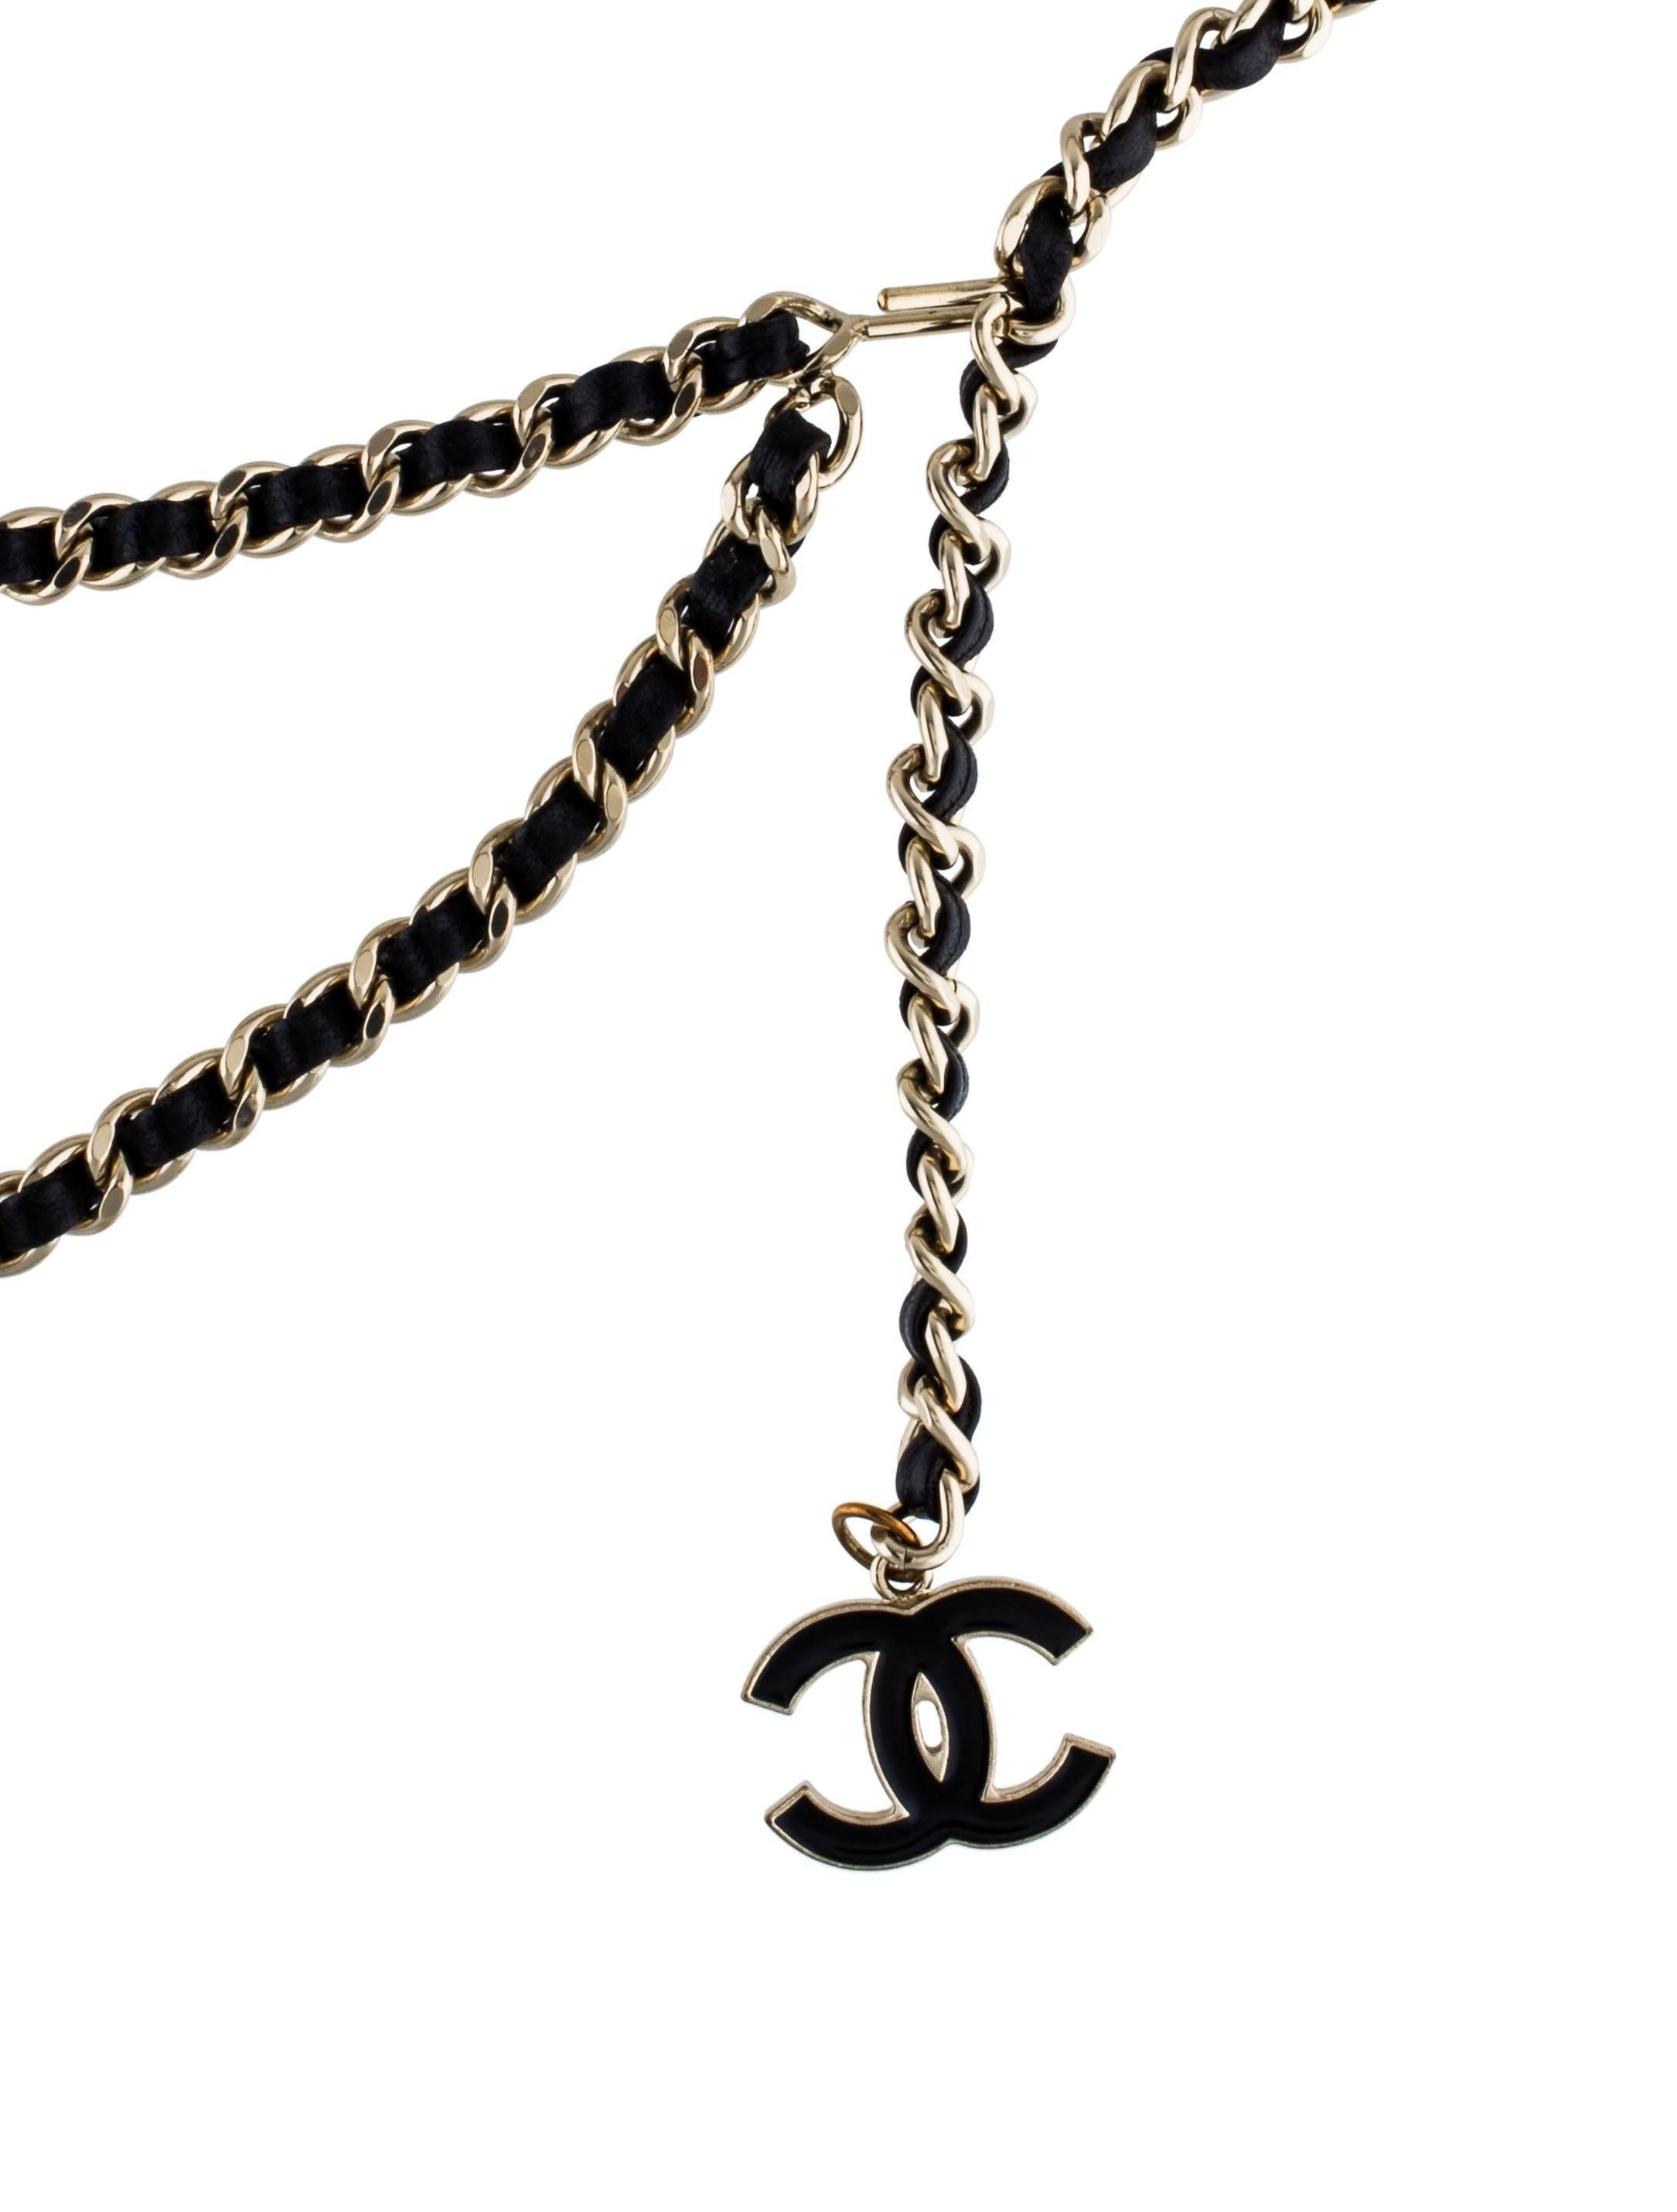 Chanel NEW Black Leather Gold Chain Charm Evening Waist Belt in Box

Leather
Metal 
Gold tone hardware
Hook closure 
Made in France
Width 0.25